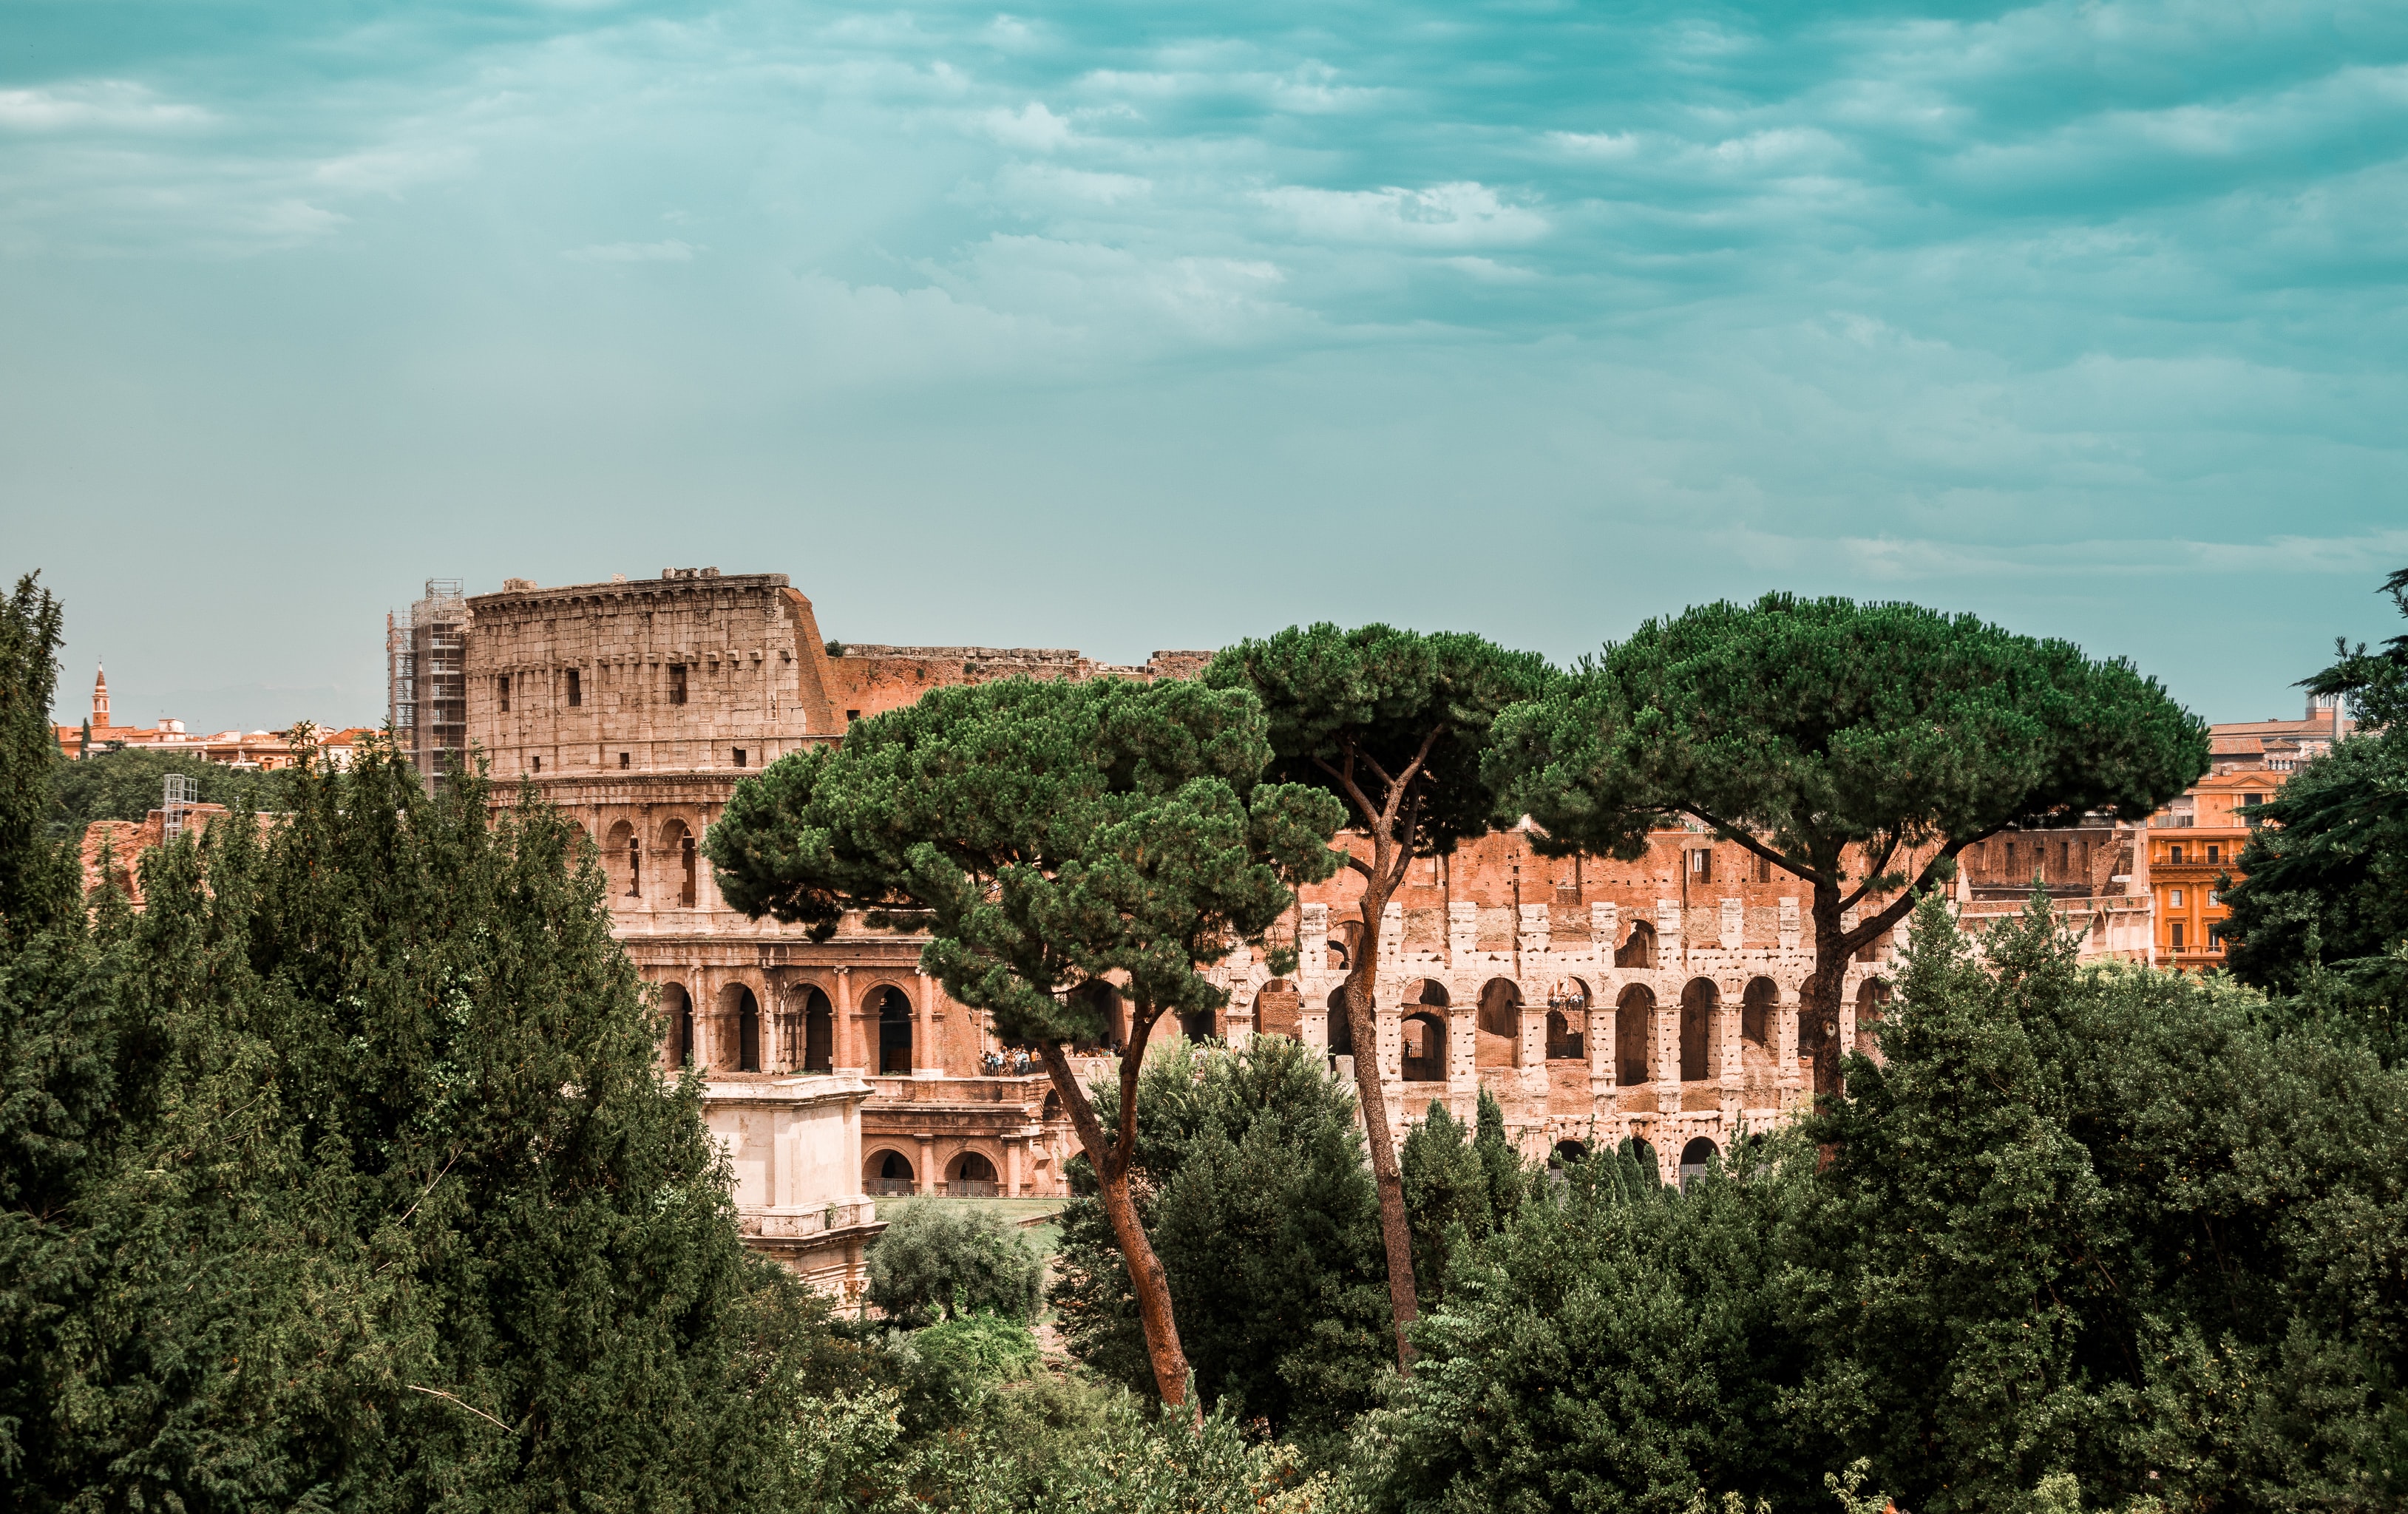 The Colisseum peaking out behind the trees.